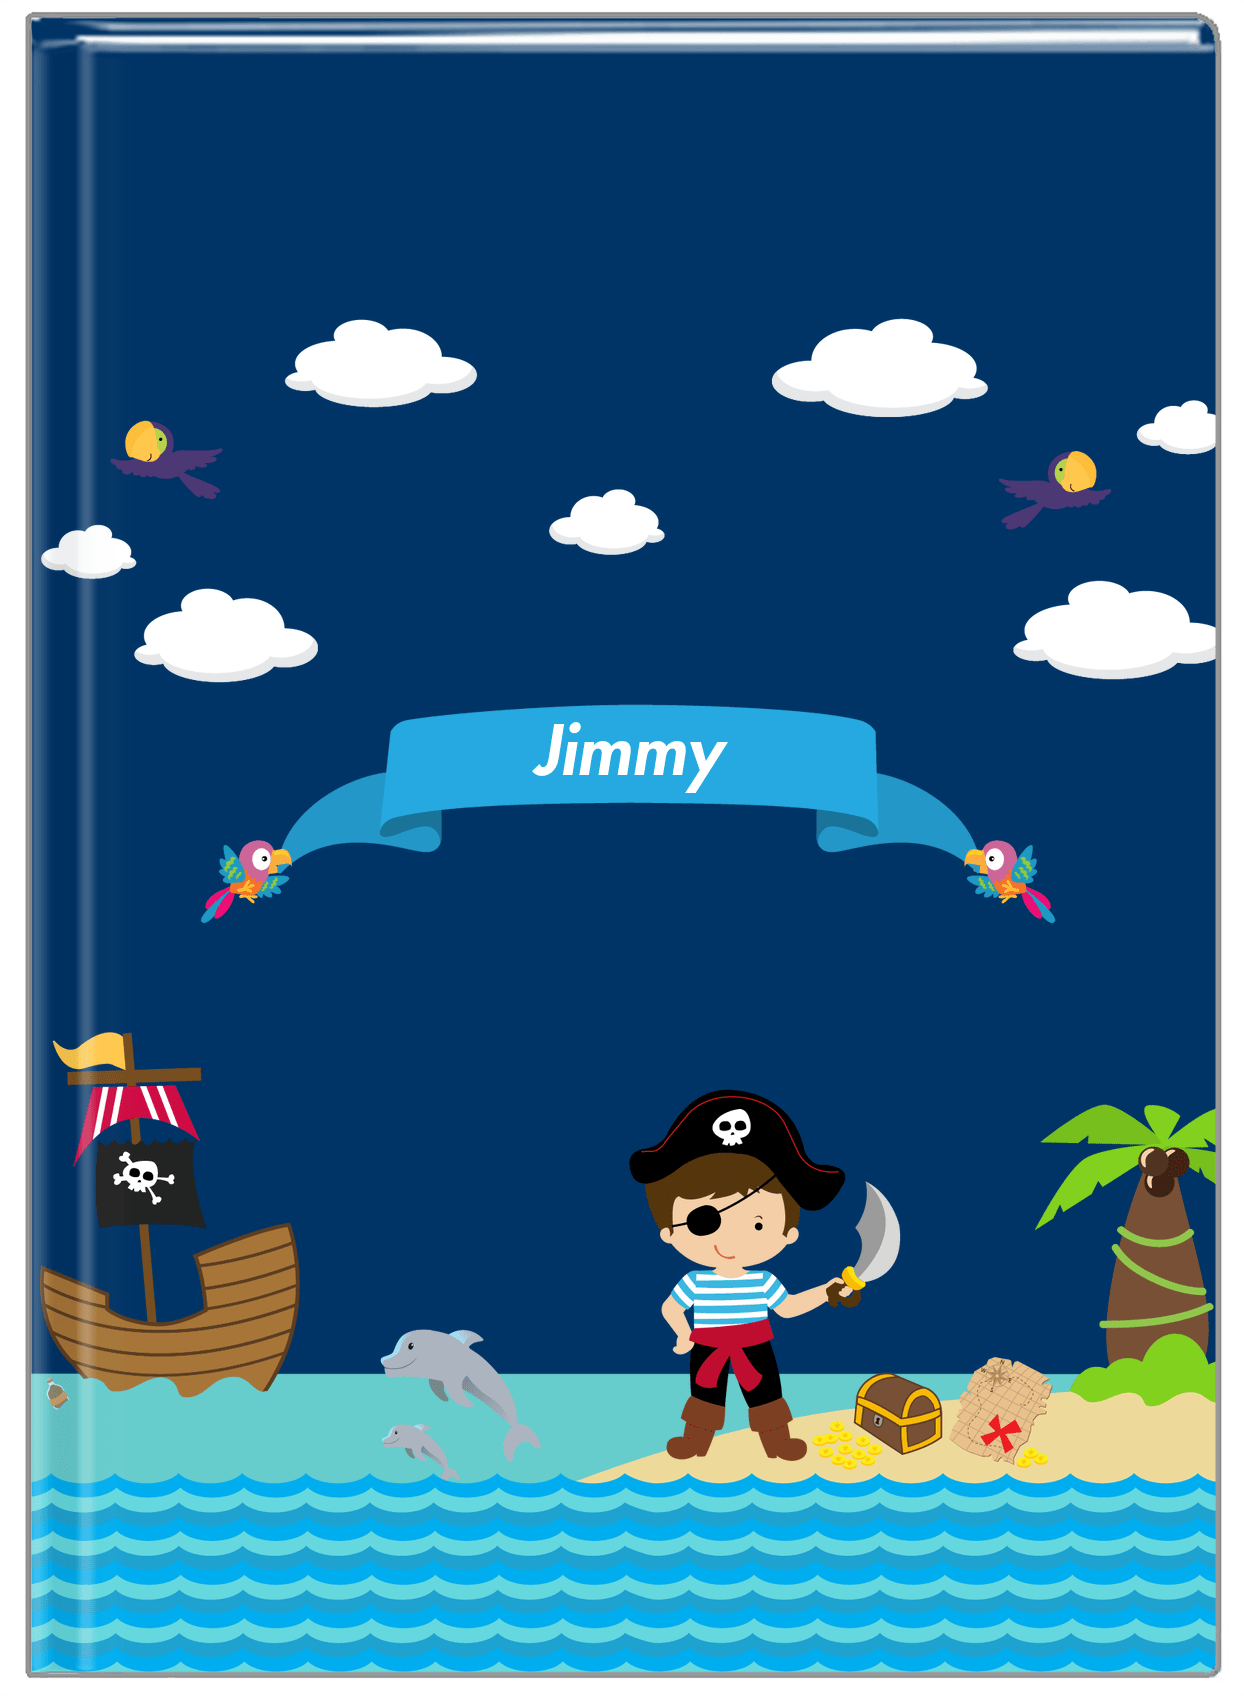 Personalized Pirate Journal IV - Boy Pirate with Sword - Brown Hair Boy - Front View